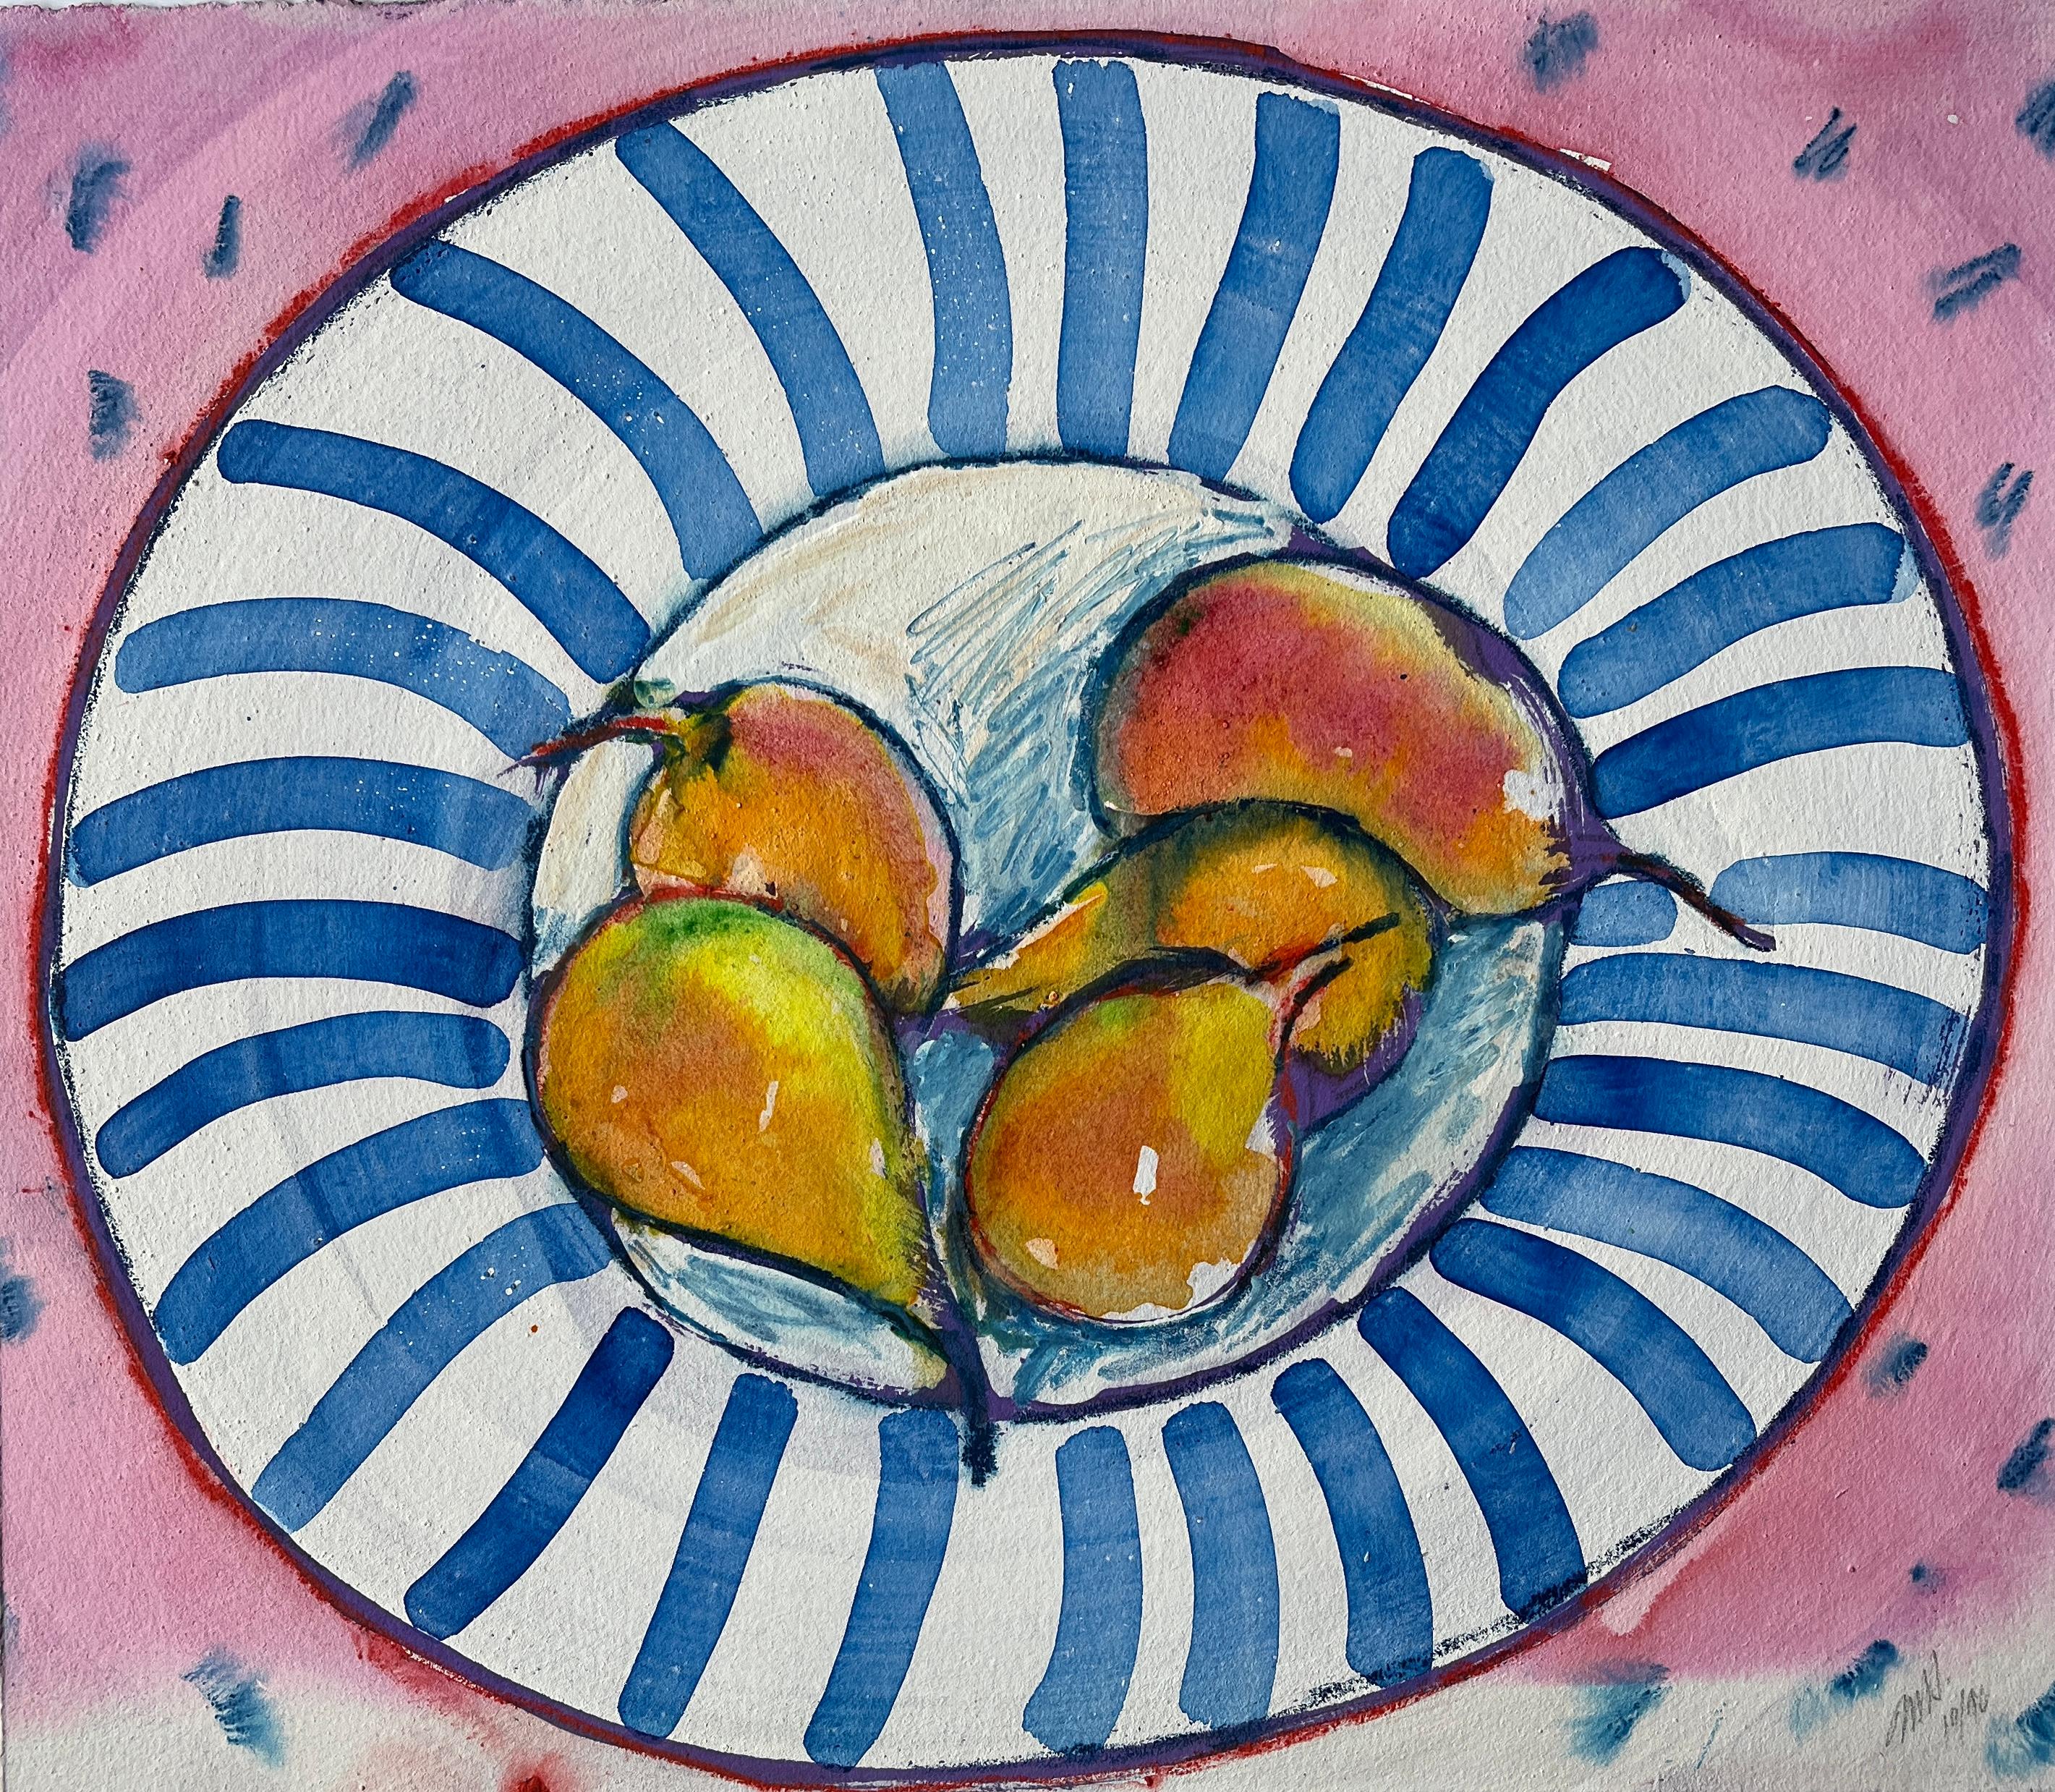 Jack Hooper
"Pears in Striped Bowl"
10-1996
Pastel and gouache on paper
16"x14" unframed
Signed and dated in pencil lower right

In this artwork, Jack Hooper presents a charming scene featuring five pears arranged in a blue and white striped bowl.